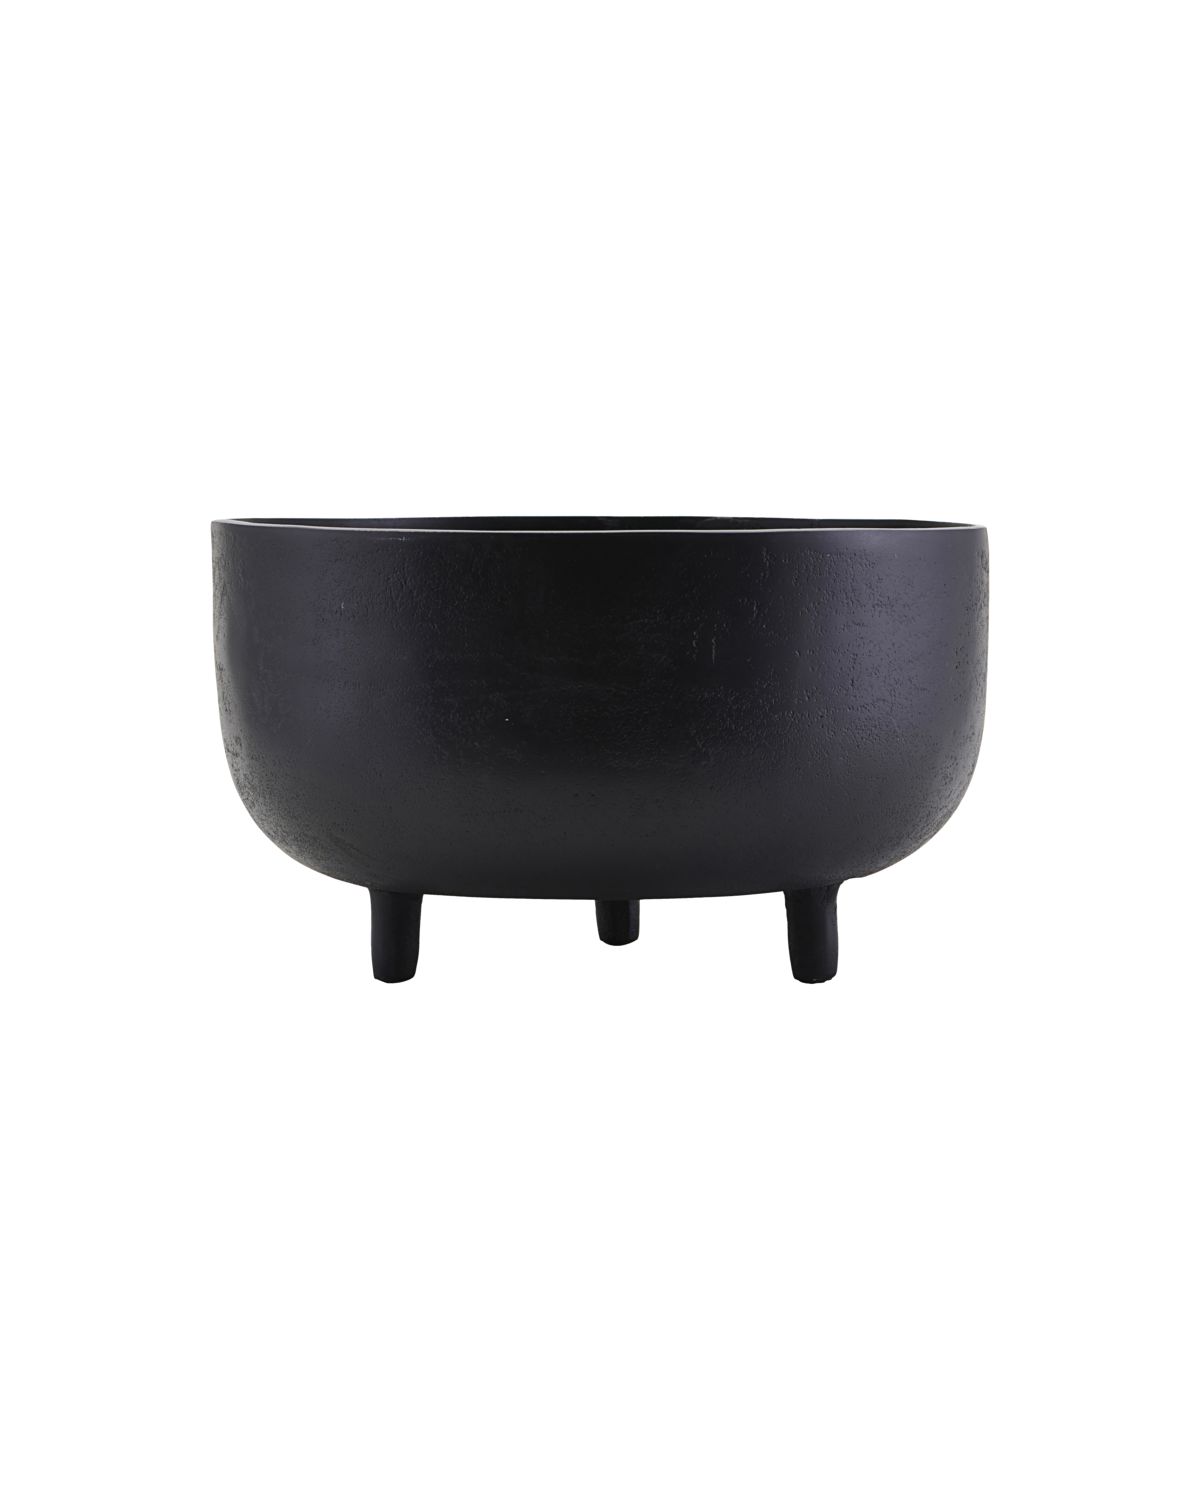 House Doctor Aluminium Bowl in Black Colour with Feet